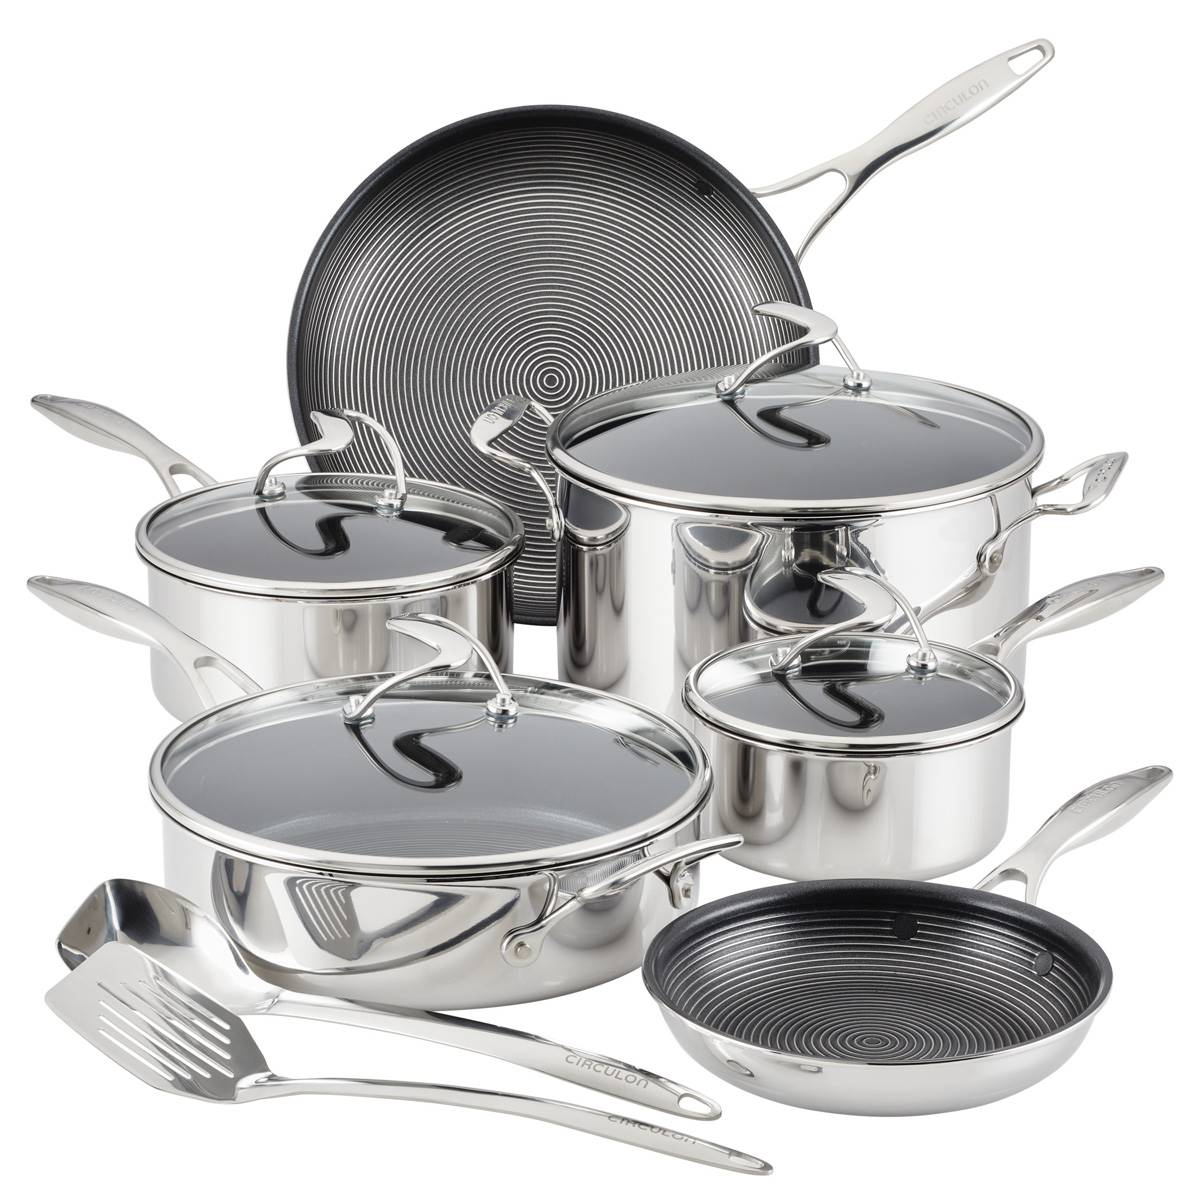 Circulon(R) 12pc. Stainless Steel Cookware And Utensil Set